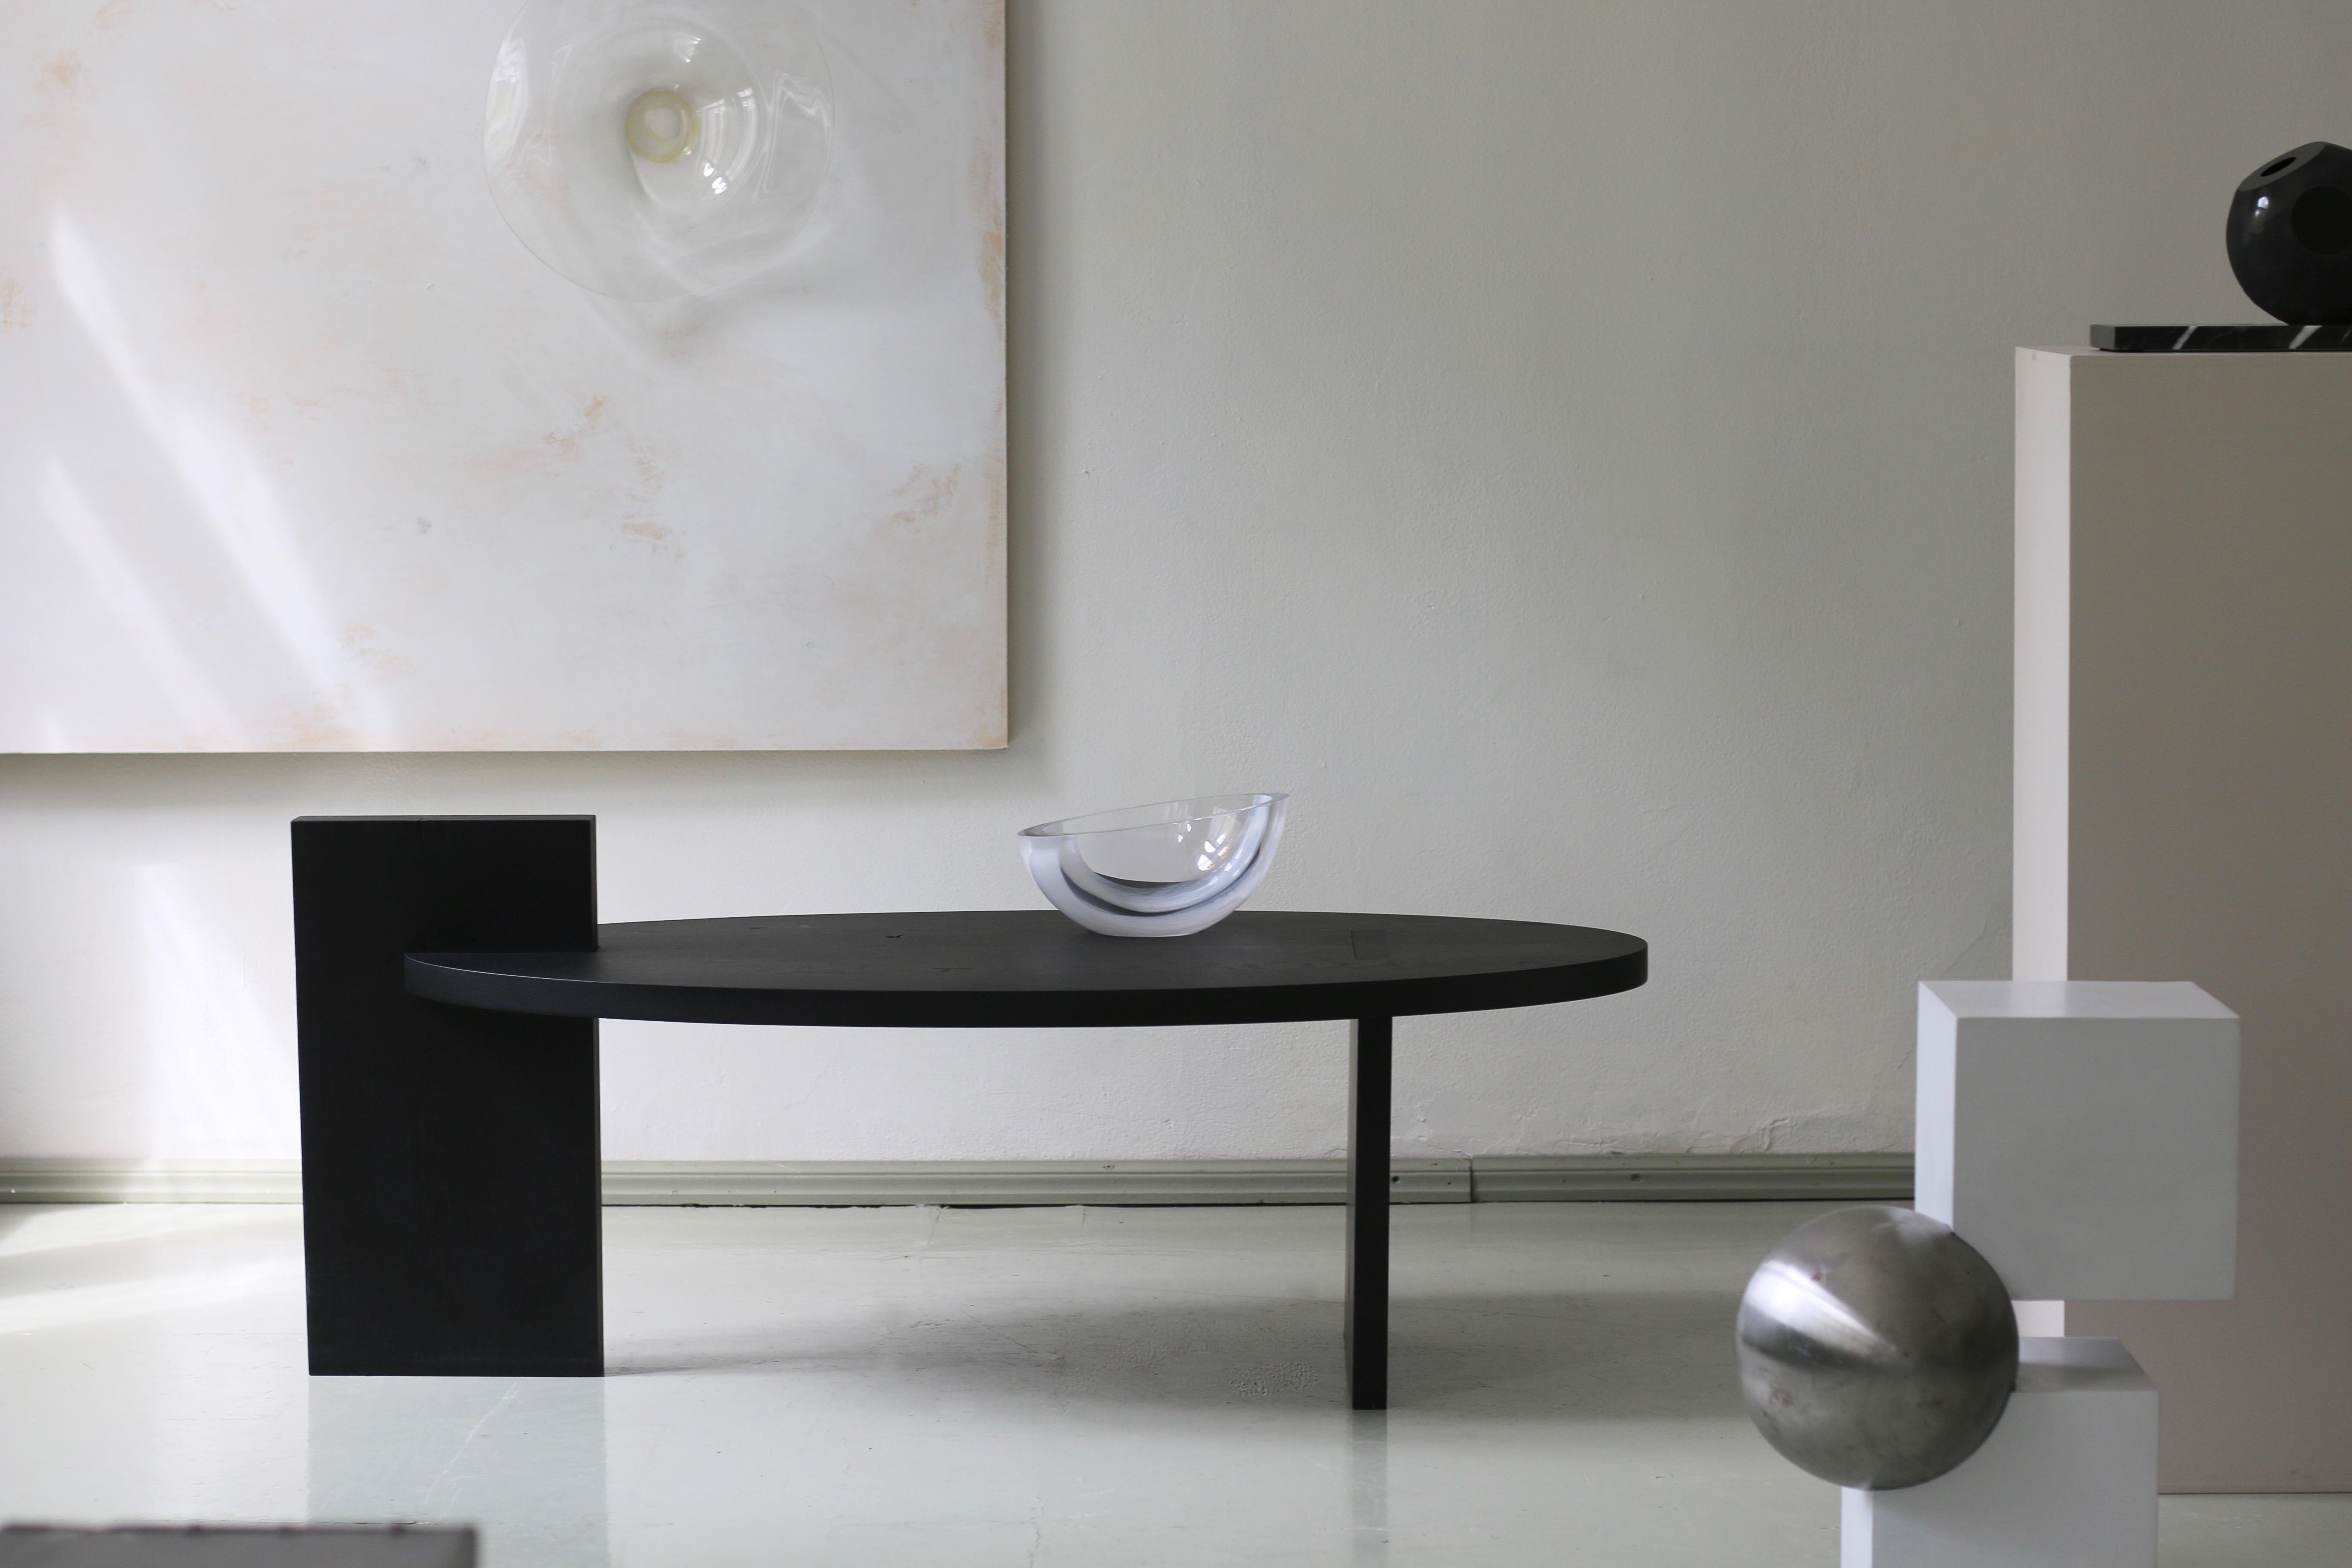 Hand-Crafted 'Black Lotus' Oval Coffee Table with glass element  by Experimental